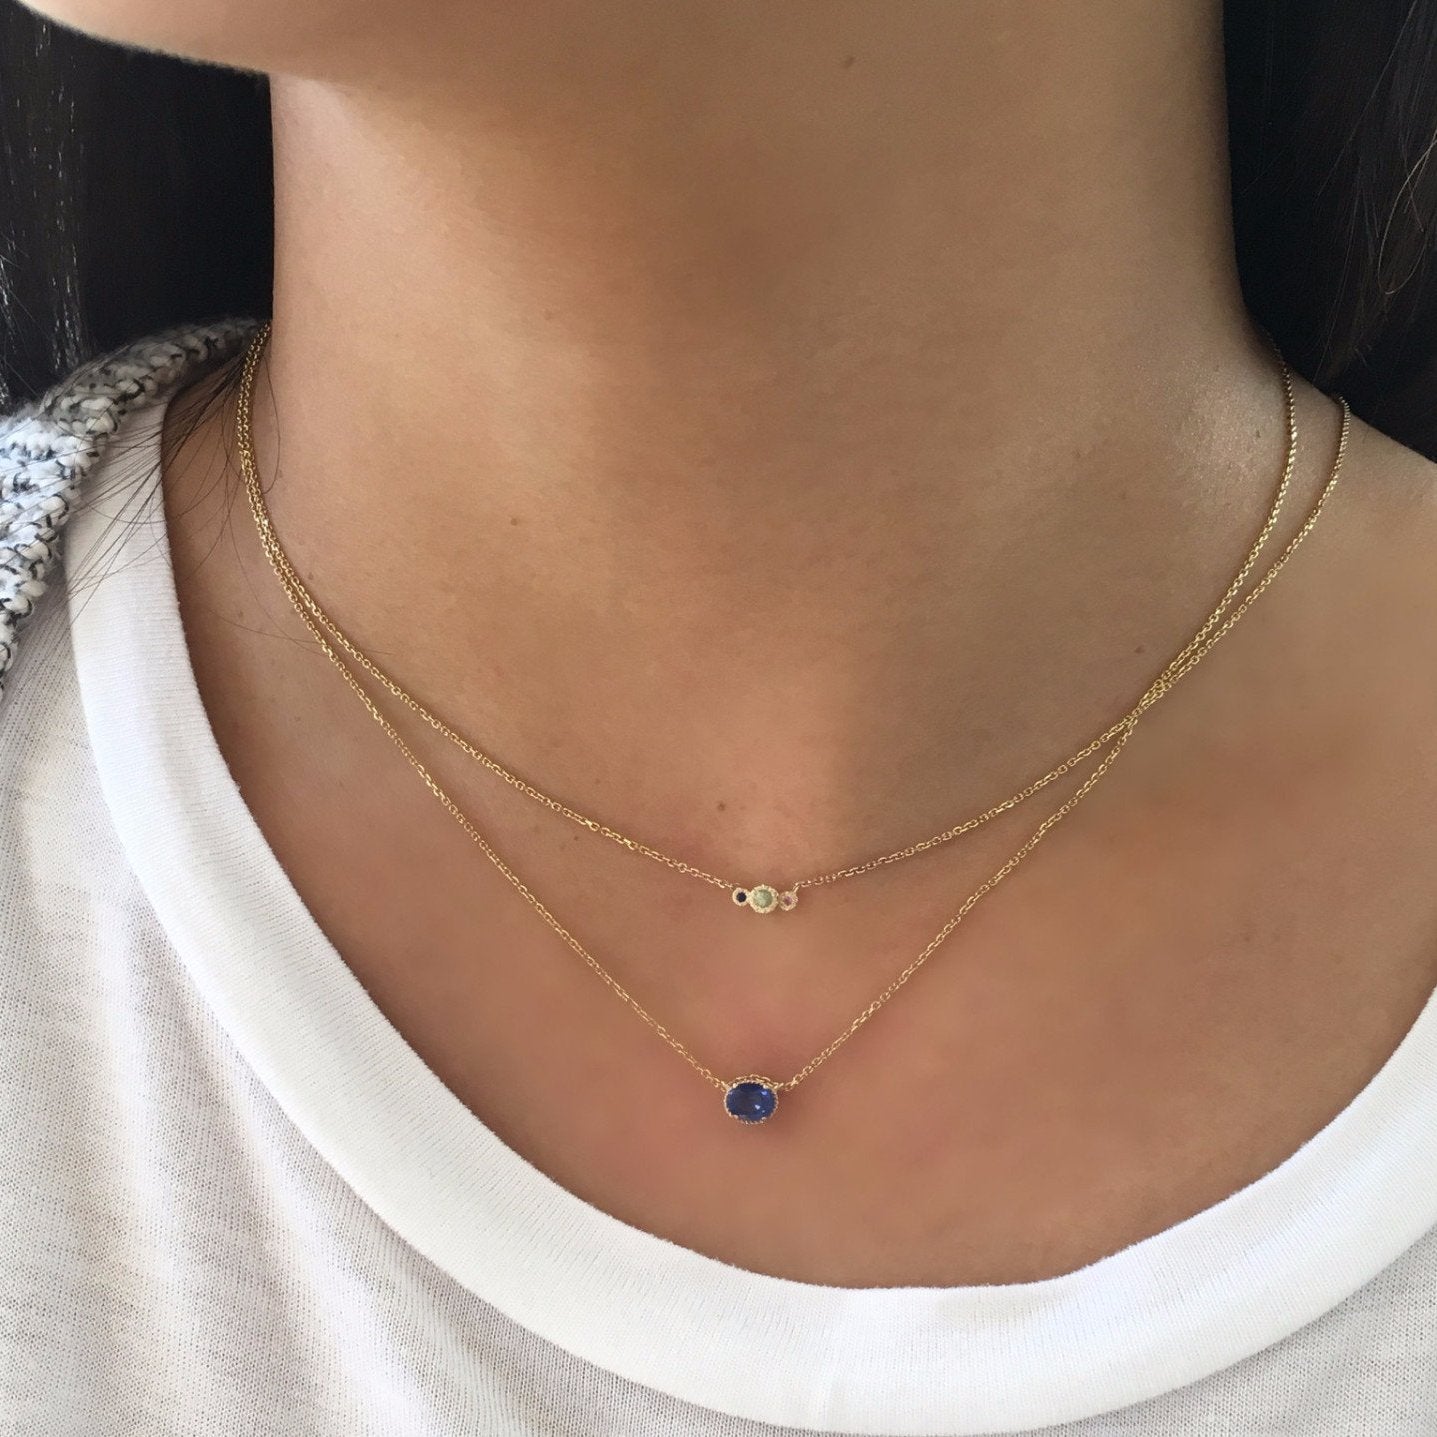 Sapphire Hope Necklace